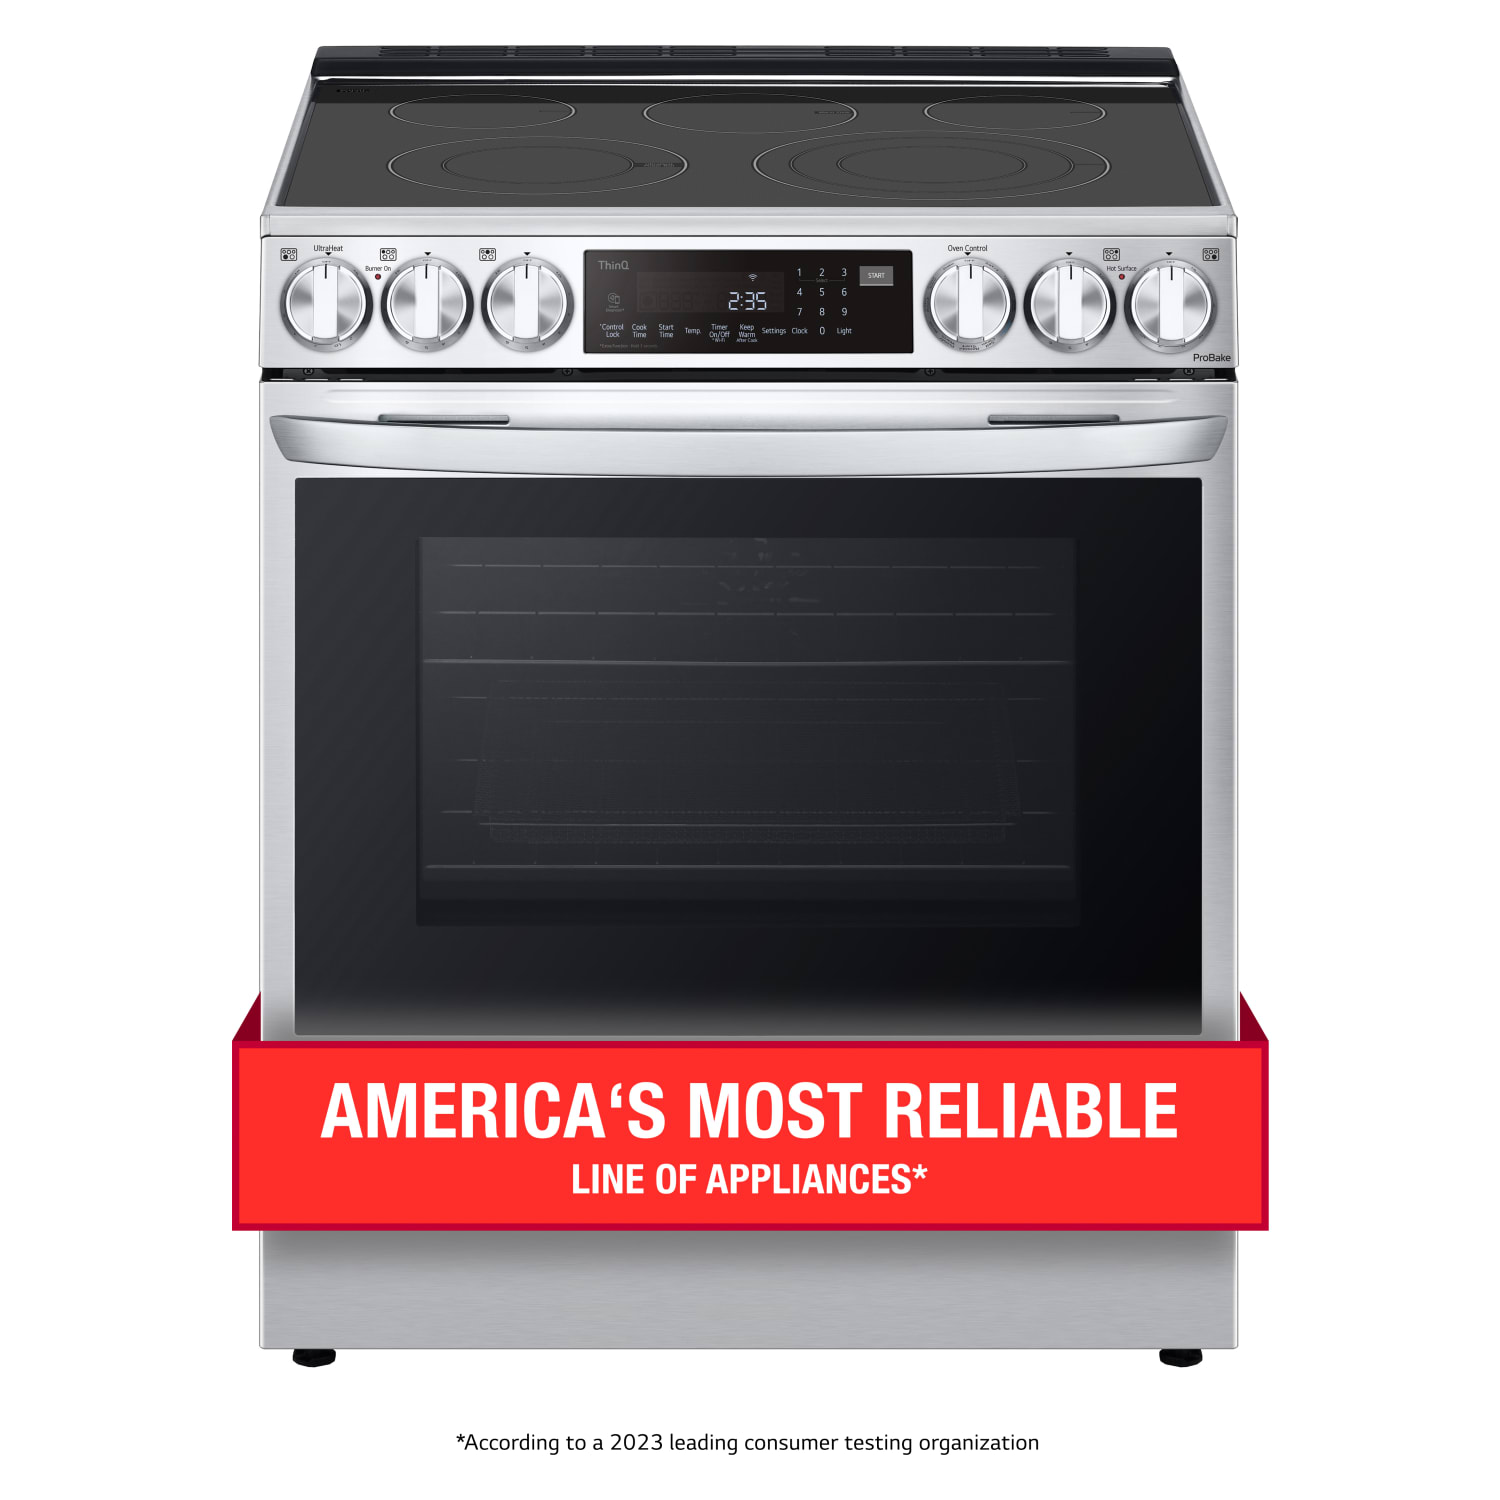 LG 6.3 cu. ft. Slide-In Electric Range WiFi Enabled w/ ProBake Convection - LSEL6335F